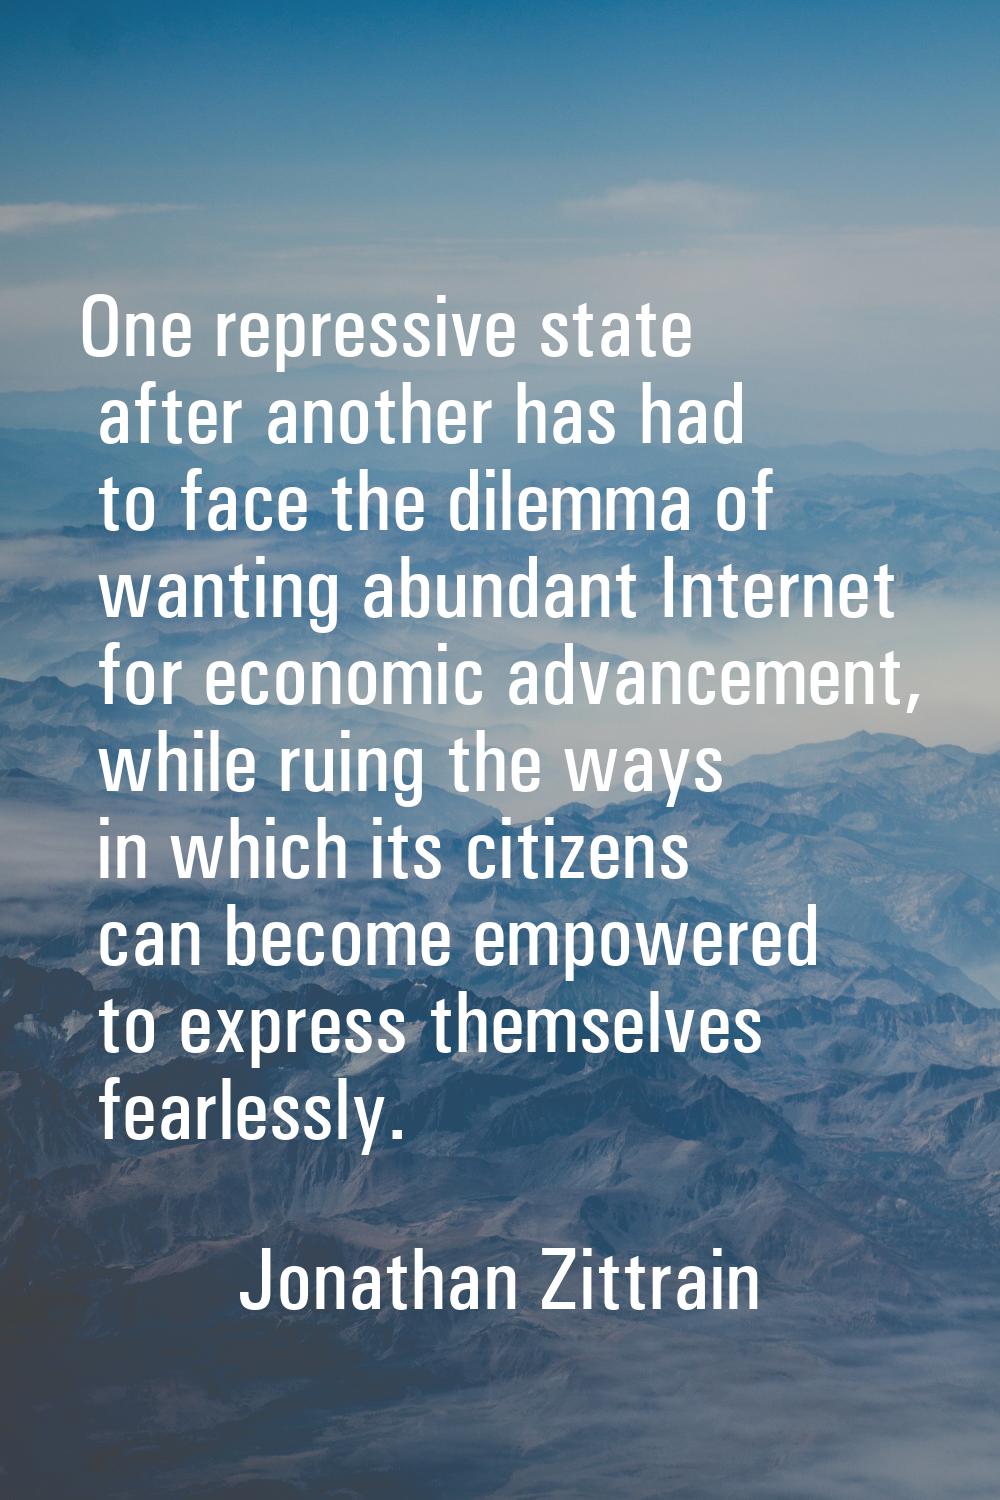 One repressive state after another has had to face the dilemma of wanting abundant Internet for eco